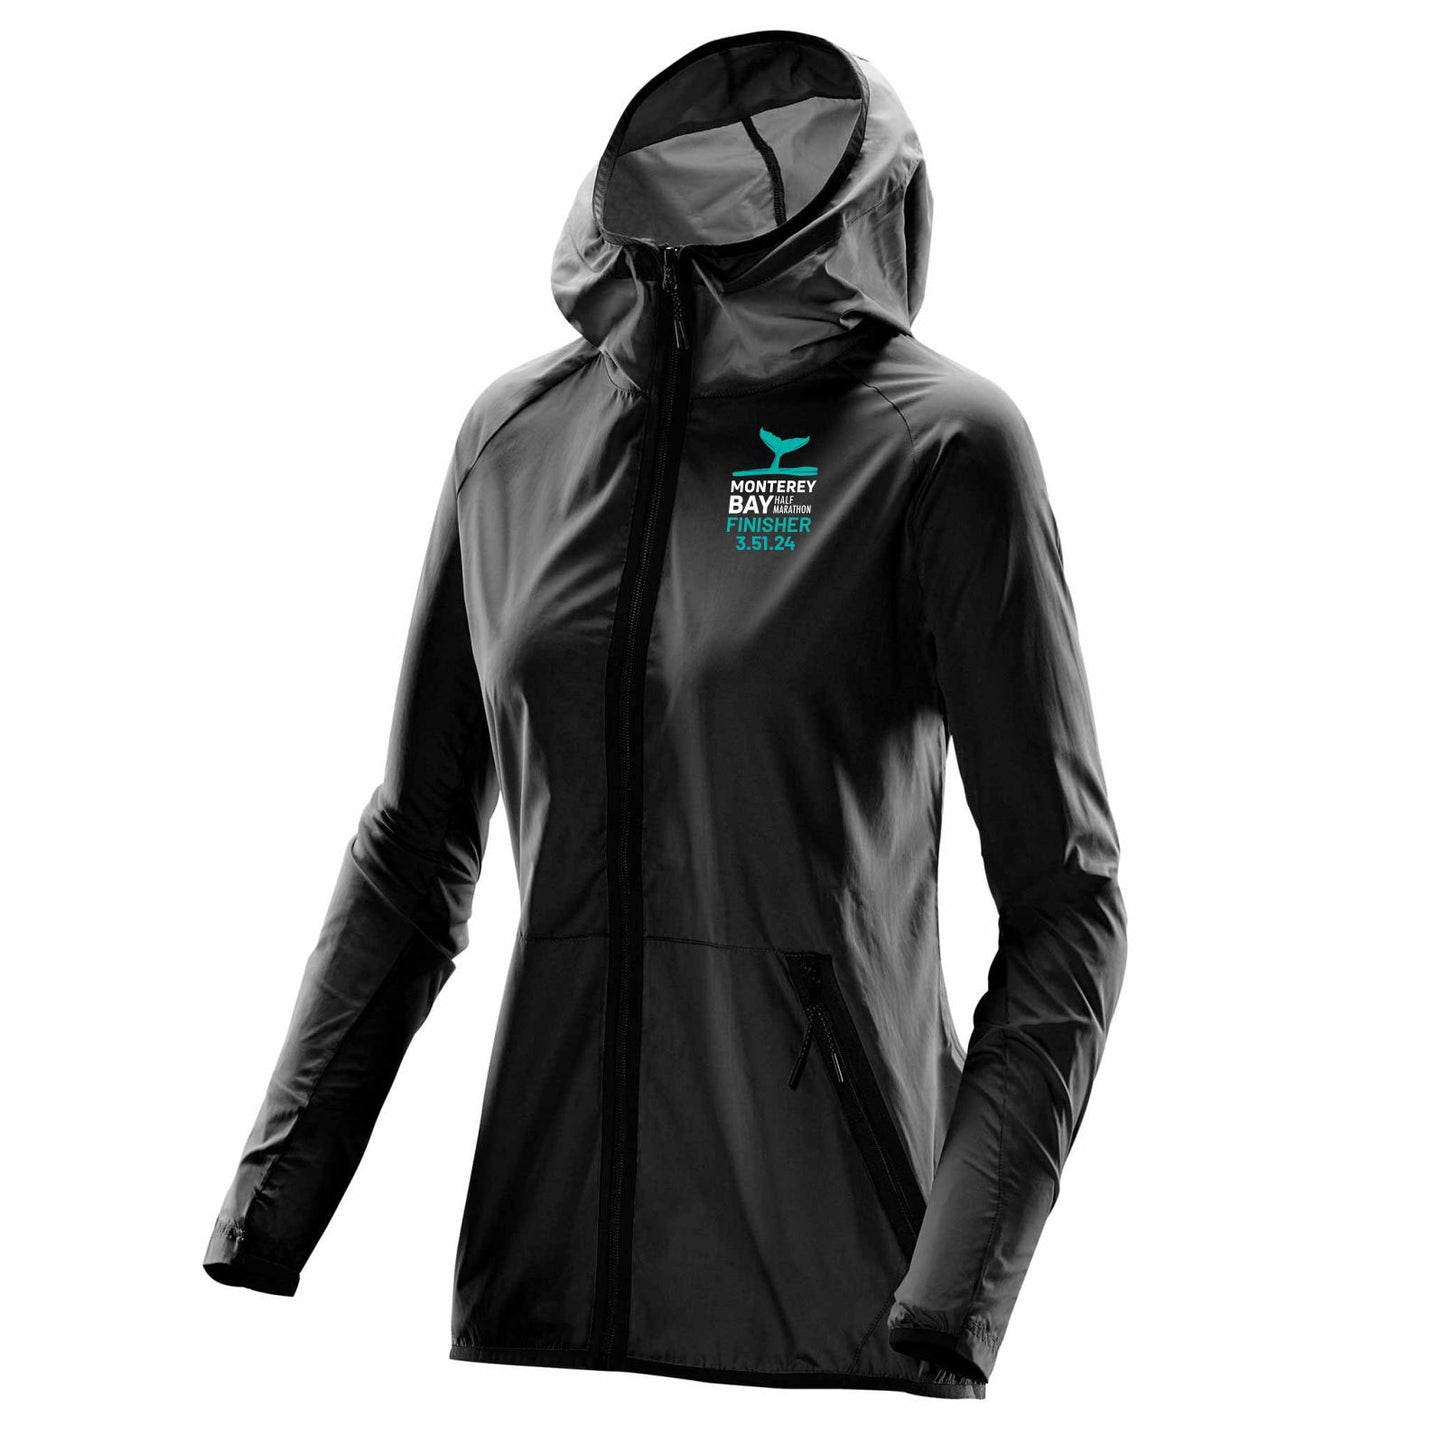 MBH Women's DWR Zip Hooded Shell -Black- Finisher Embroidery